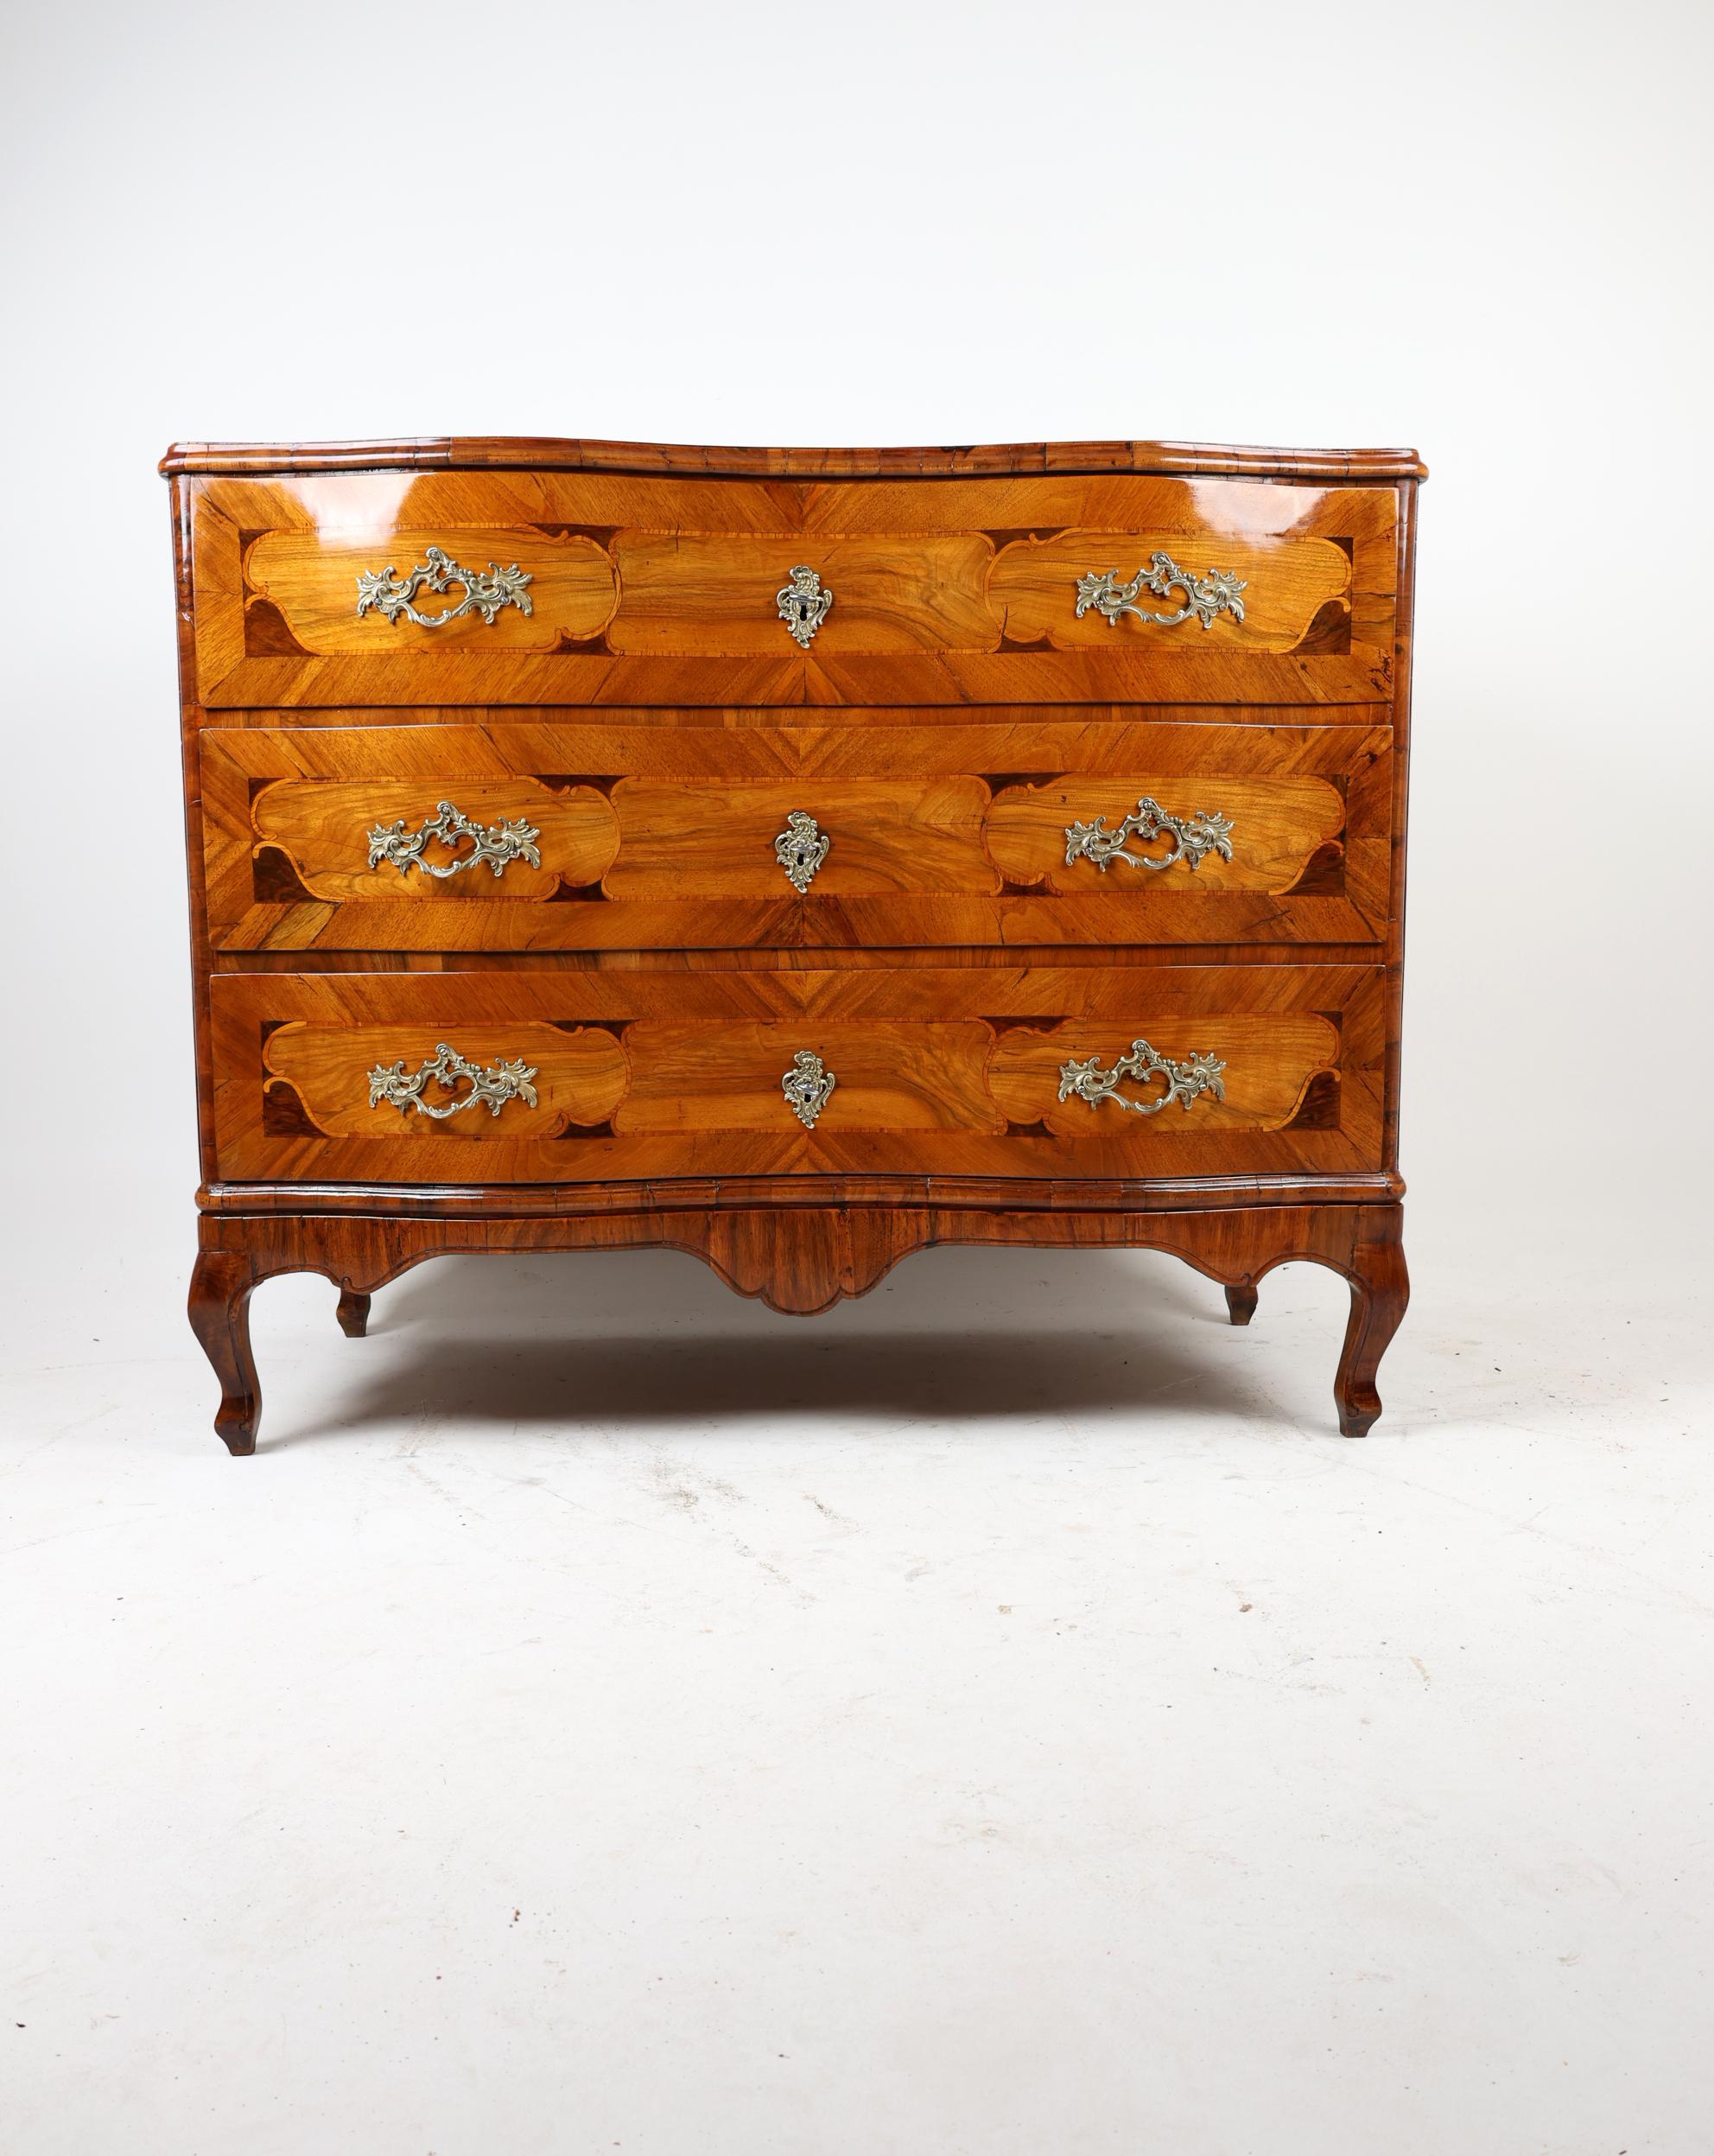 Polished Late 18th Century Baroque Commode with Burl Walnut For Sale